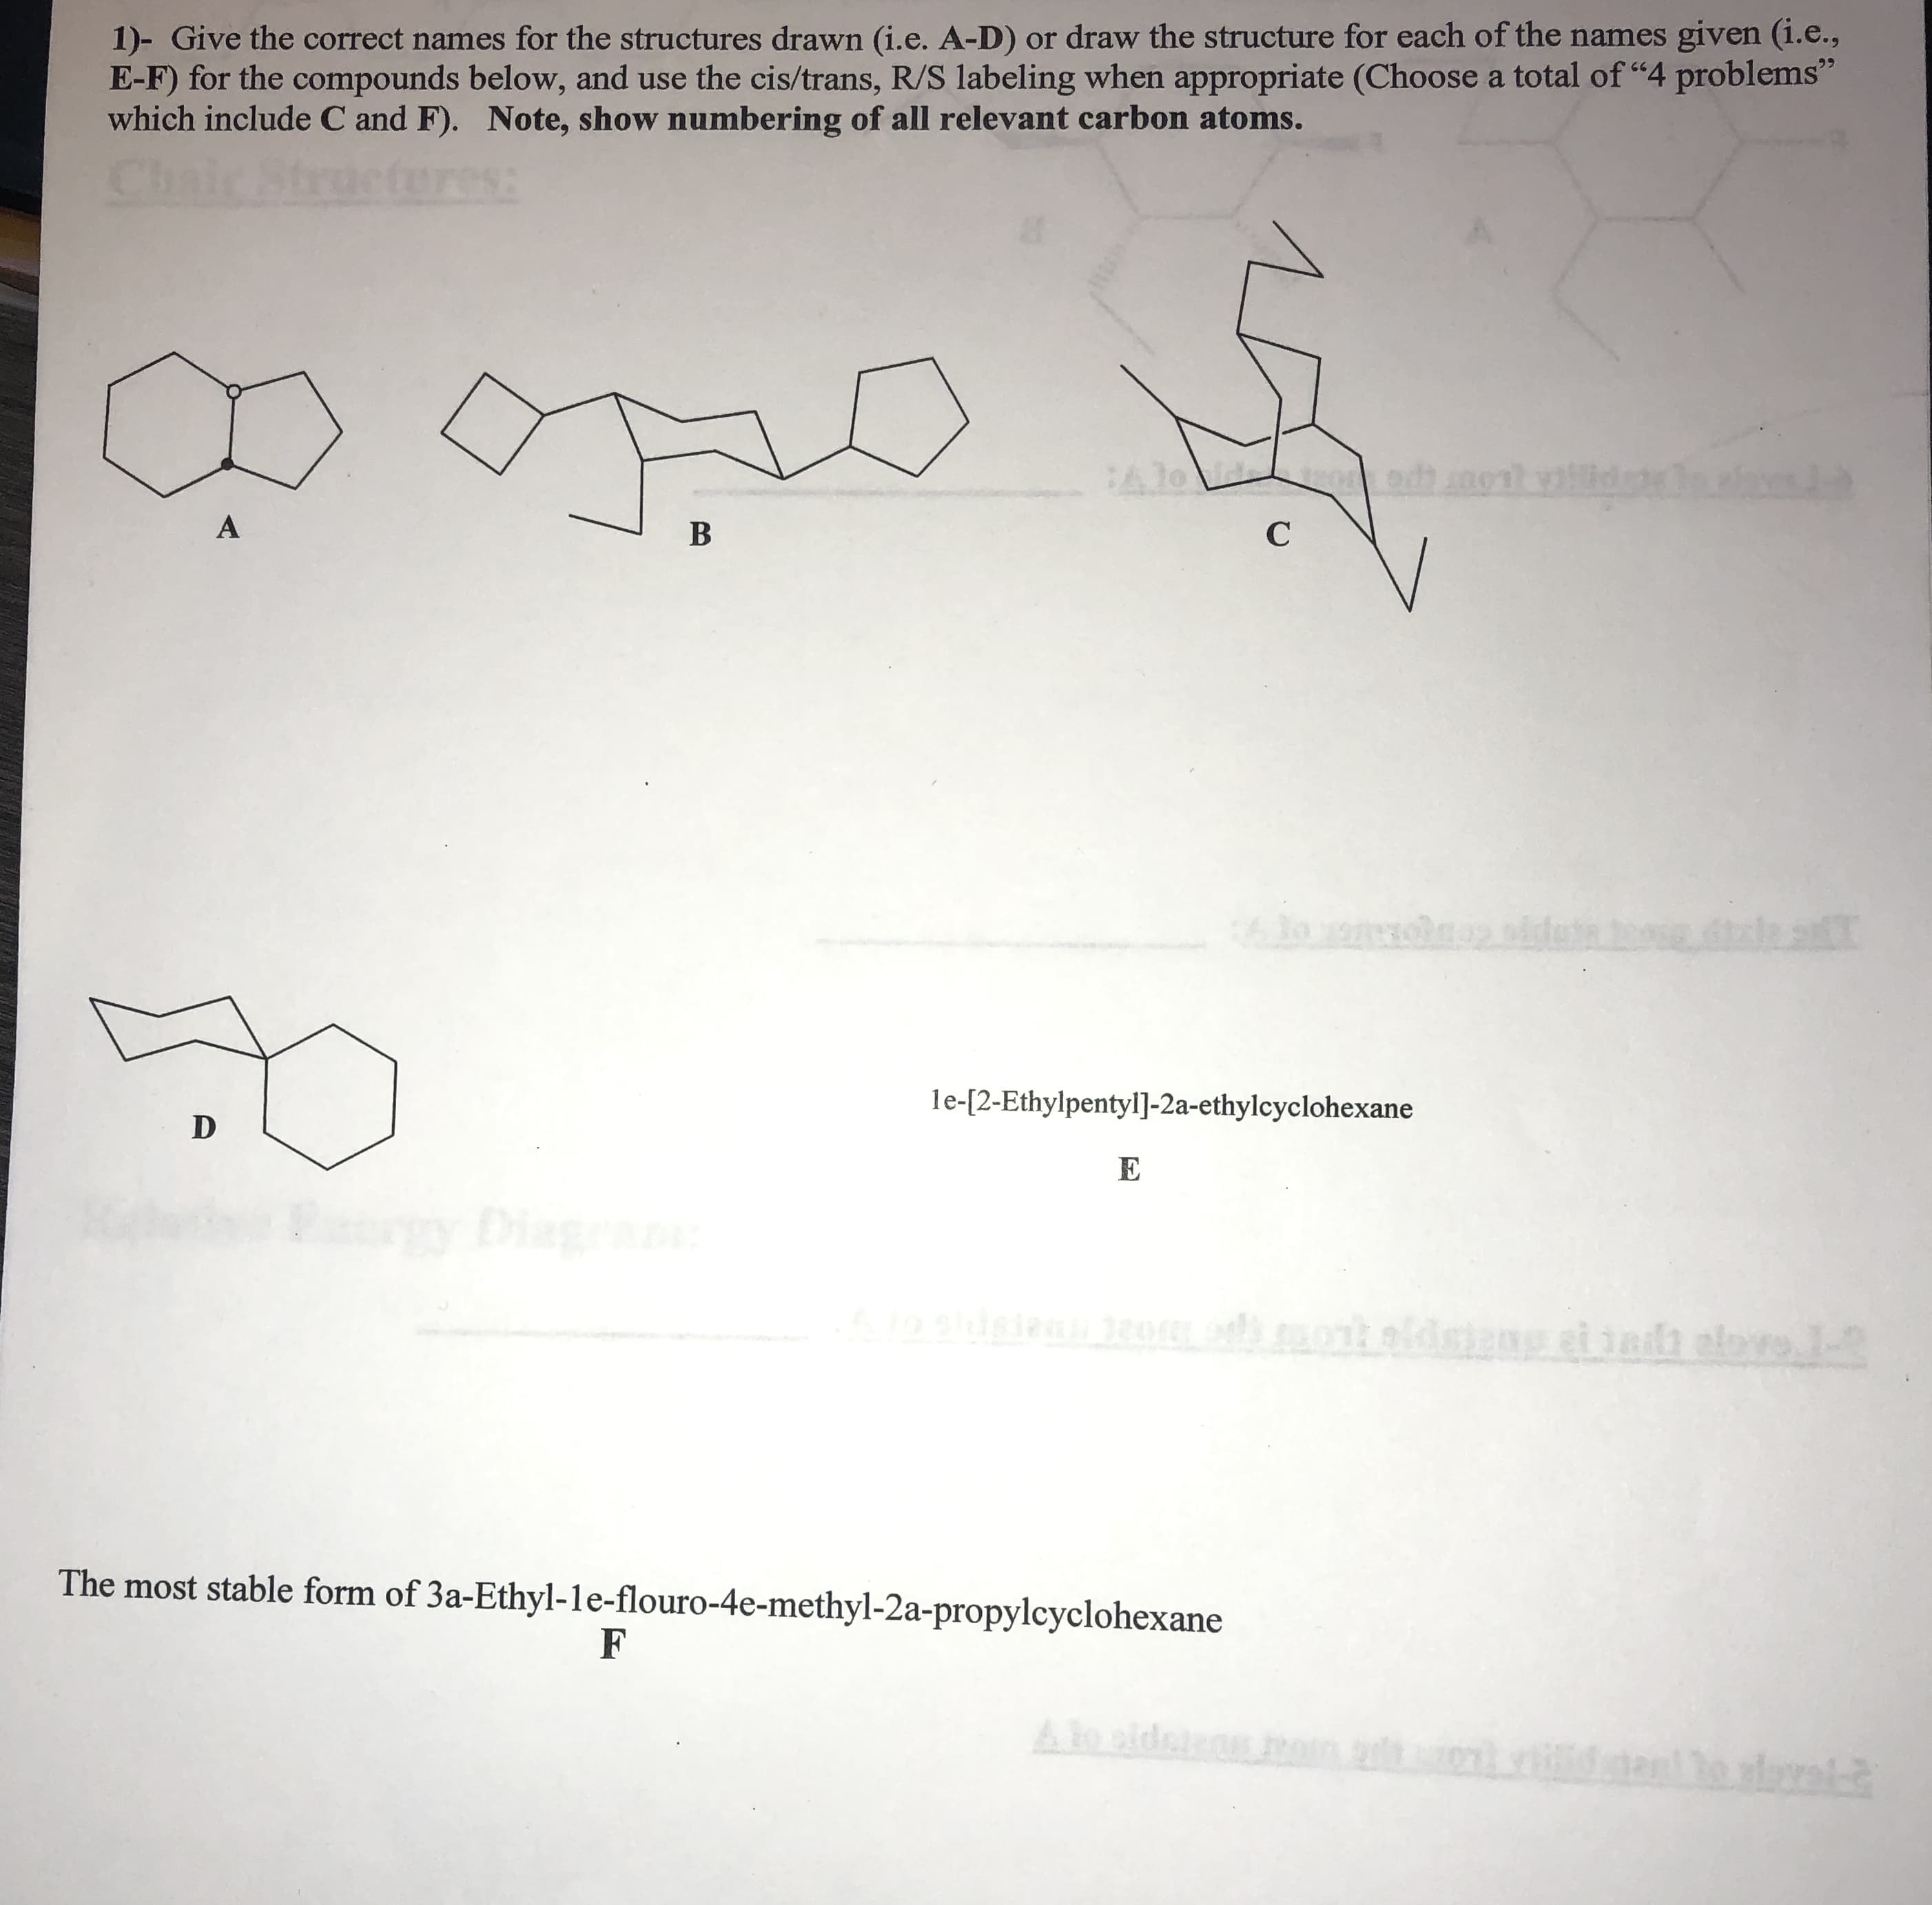 1)- Give the correct names for the structures drawn (i.e. A-D) or draw the structure for each of the names given (i.e.,
E-F) for the compounds below, and use the cis/trans, R/S labeling when appropriate (Choose a total of "4 problems"
which include C and F). Note, show numbering of all relevant carbon atoms.
le-[2-Ethylpentyl]-2a-ethylcyclohexane
The most stable form of 3a-Ethyl-le-flouro-4e-methyl-2a-propylcyclohexane
